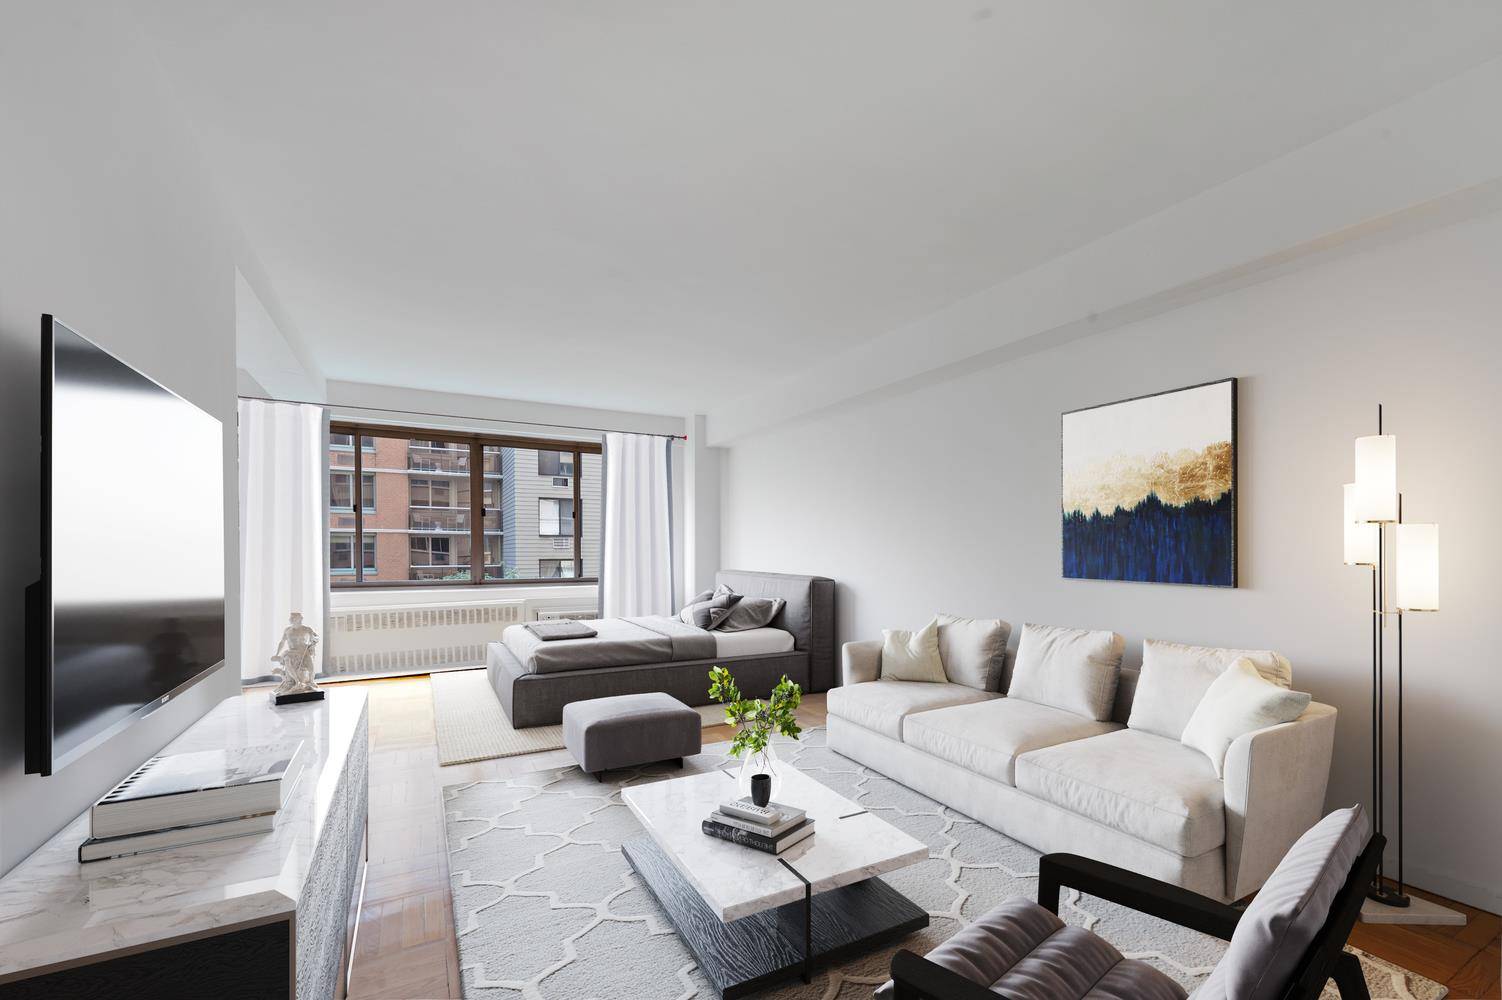 SPECTACULAR South Facing Alcove Studio CONDO Fabulous Spacious Layout, 3 Generous Closets, Hard wood Parquet Floors, All South Facing Windows, Open Kitchen with lots of counter space, in Full Service ...